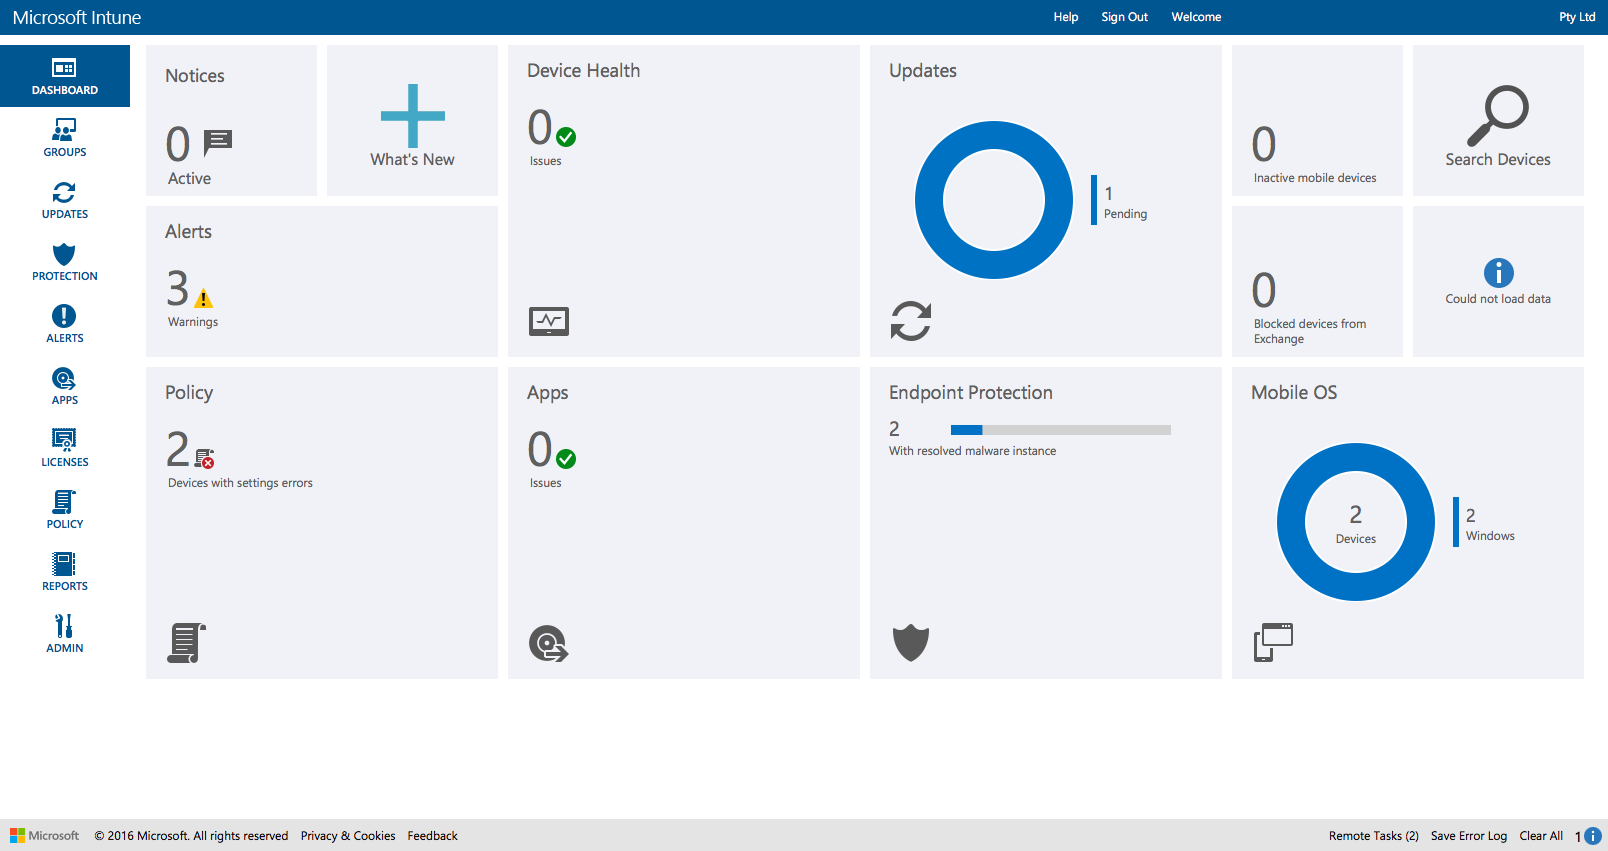 Intune with devices management via the client and potentially MDM